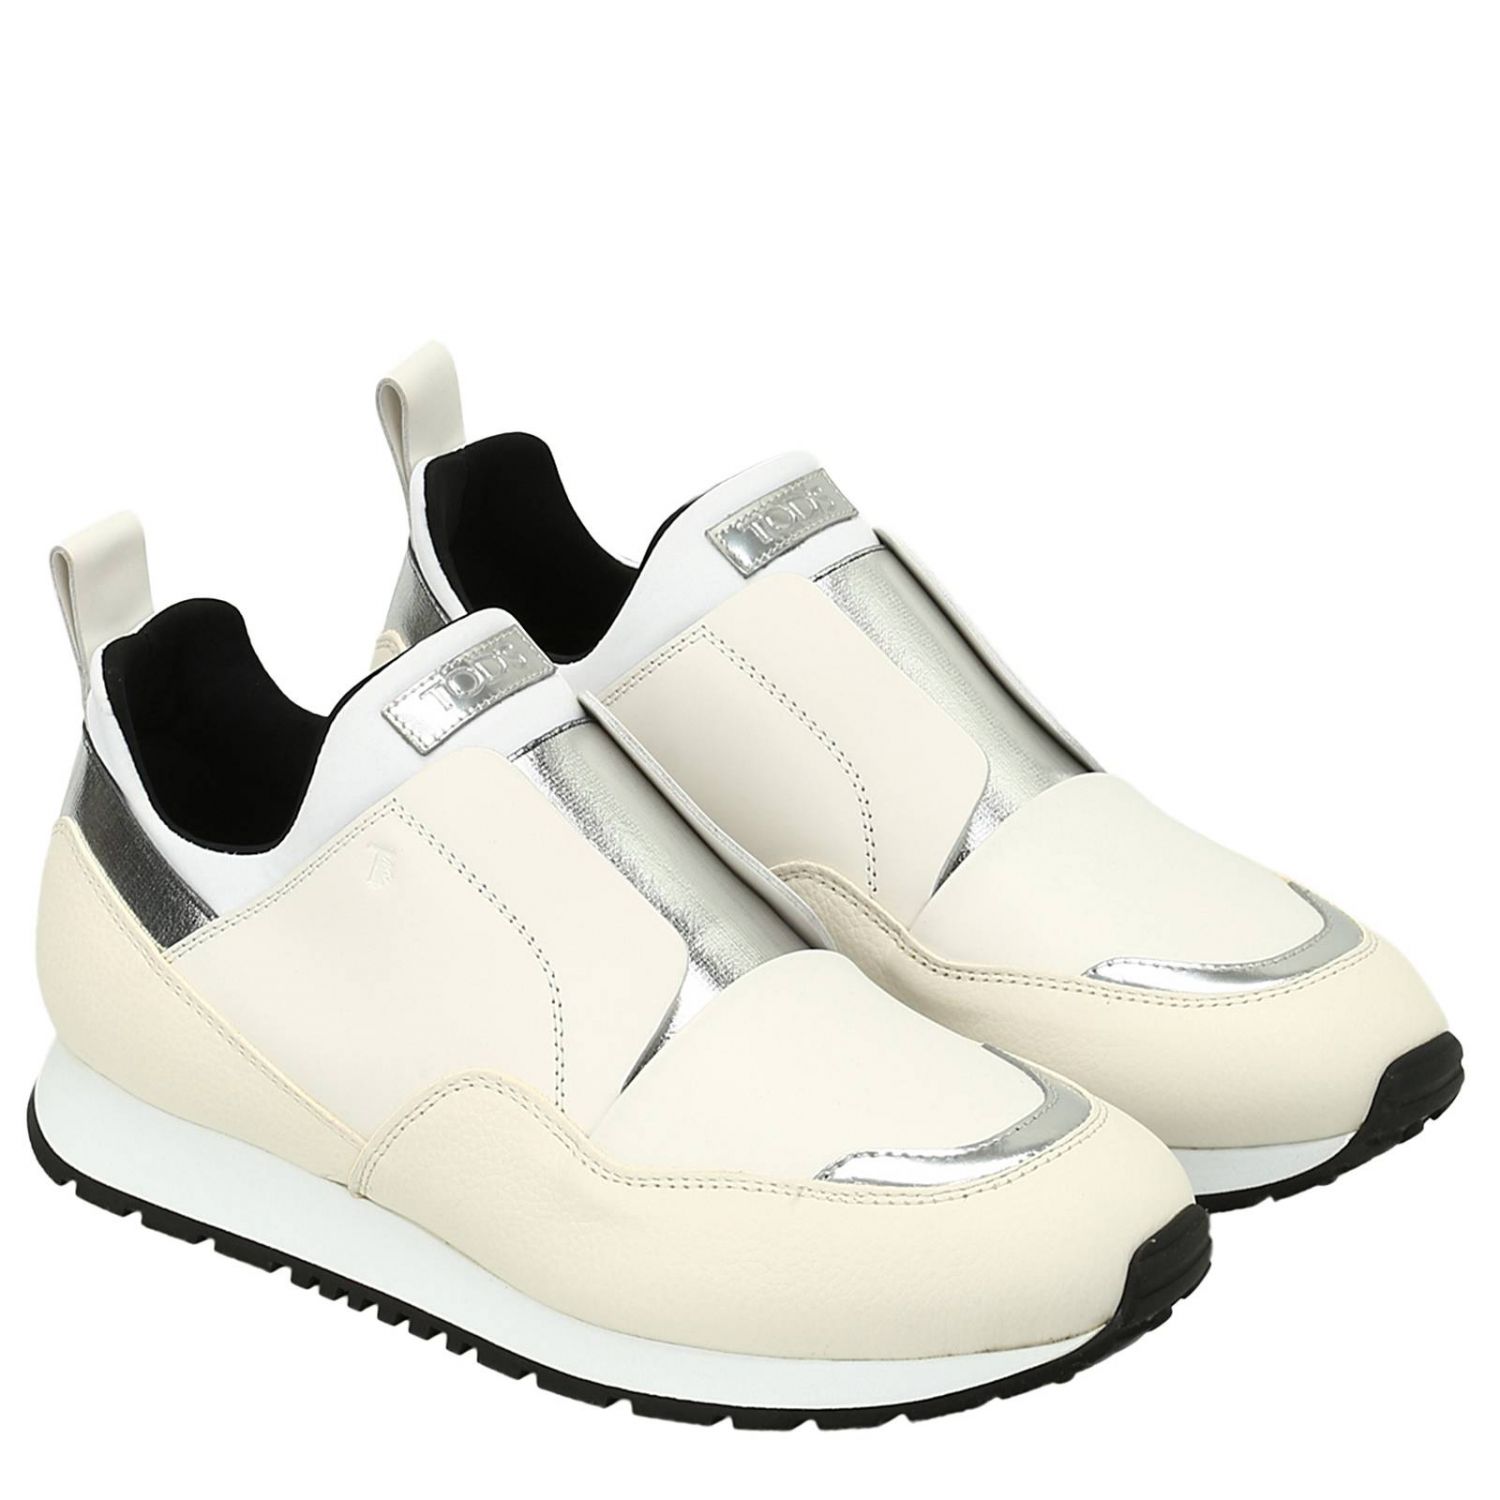 Tods Outlet: Sneakers women Tod's | Sneakers Tods Women White ...